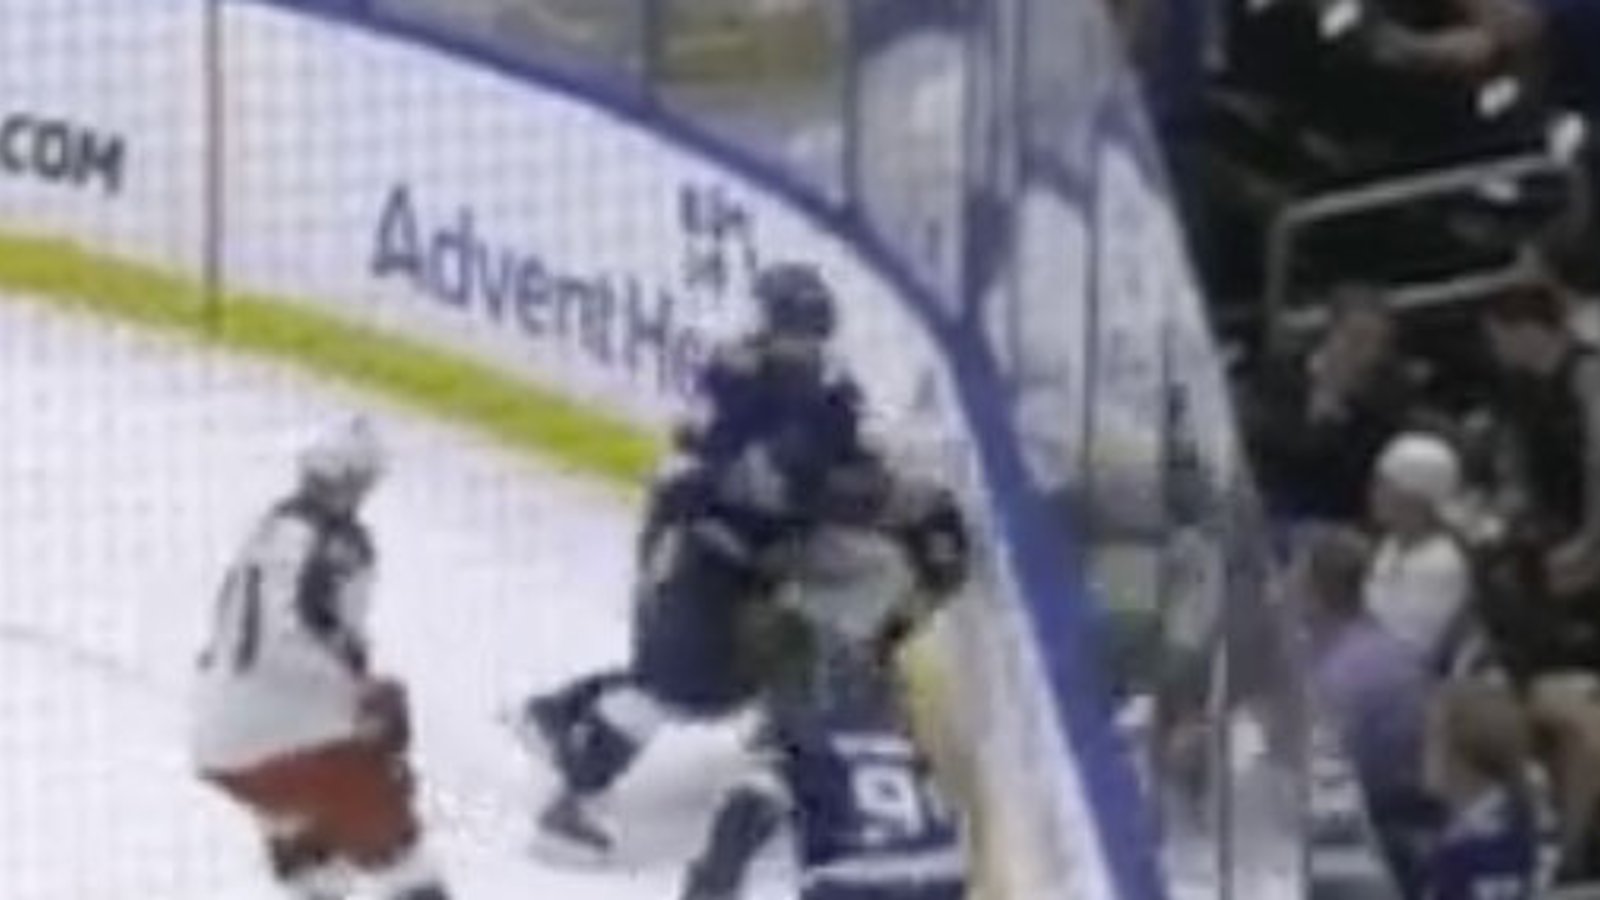 Breaking: Kucherov could be suspended for part of this series! 